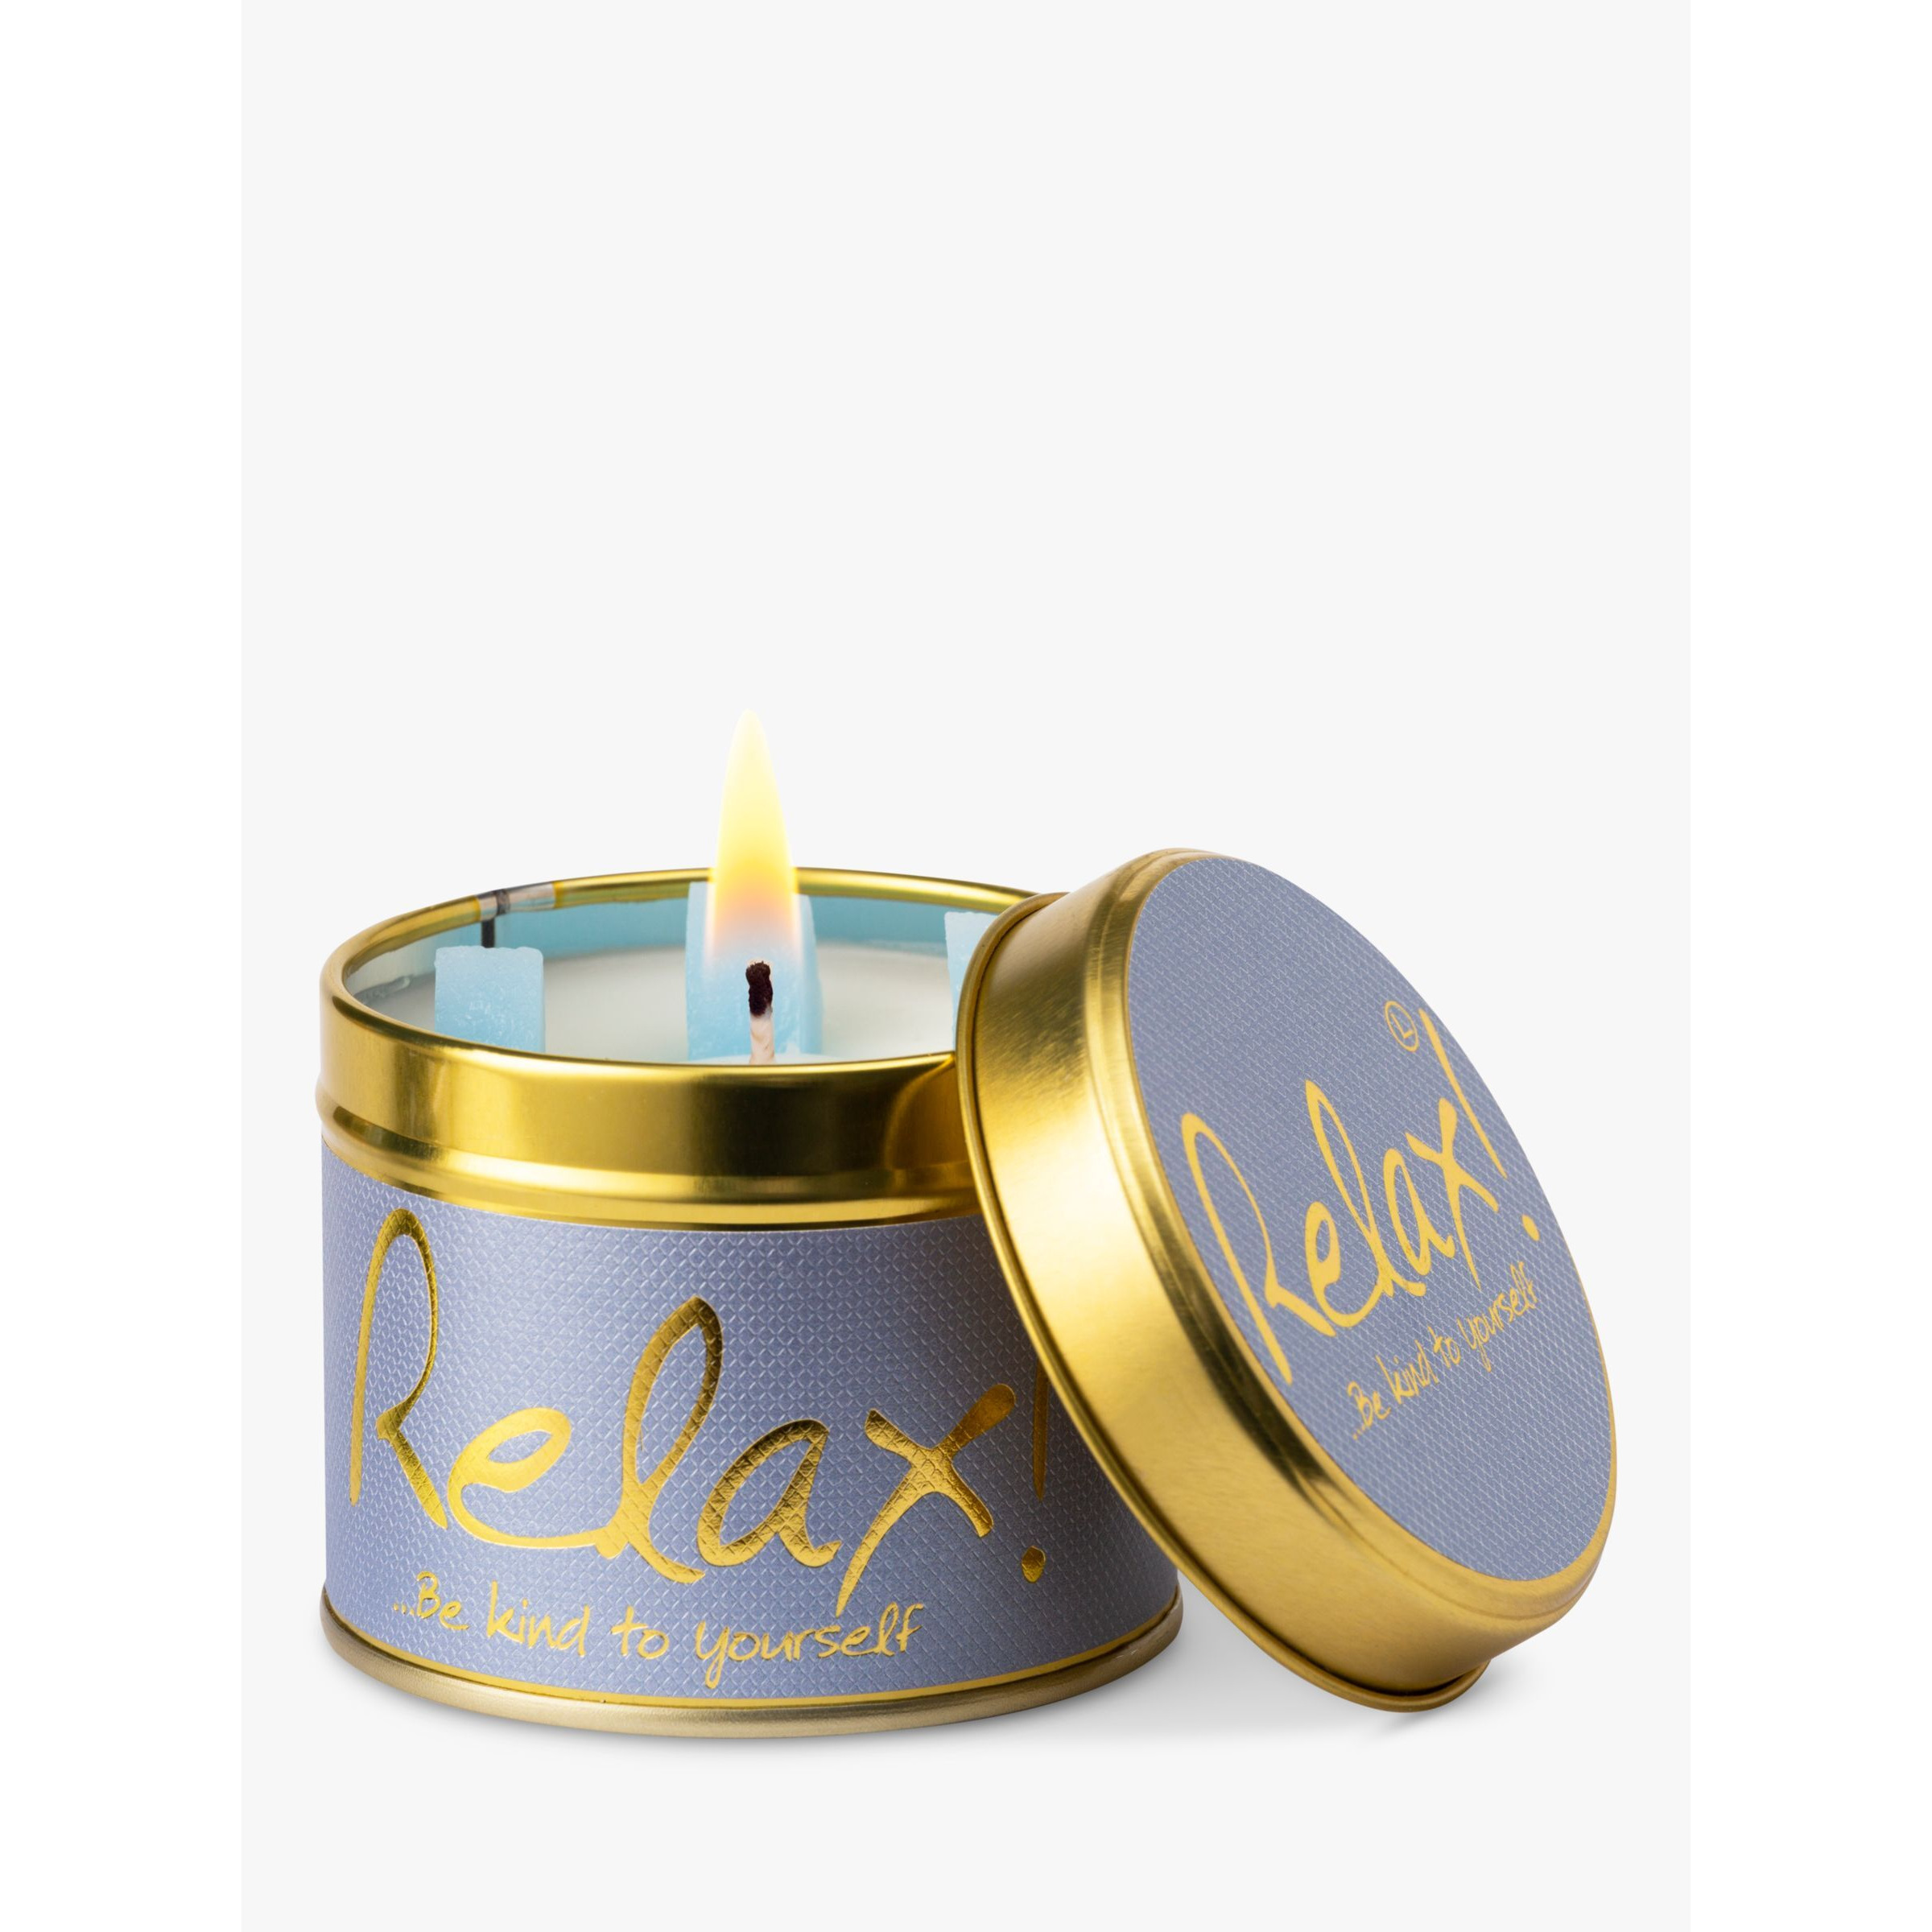 Lily-flame Relax Tin Scented Candle, 230g - image 1